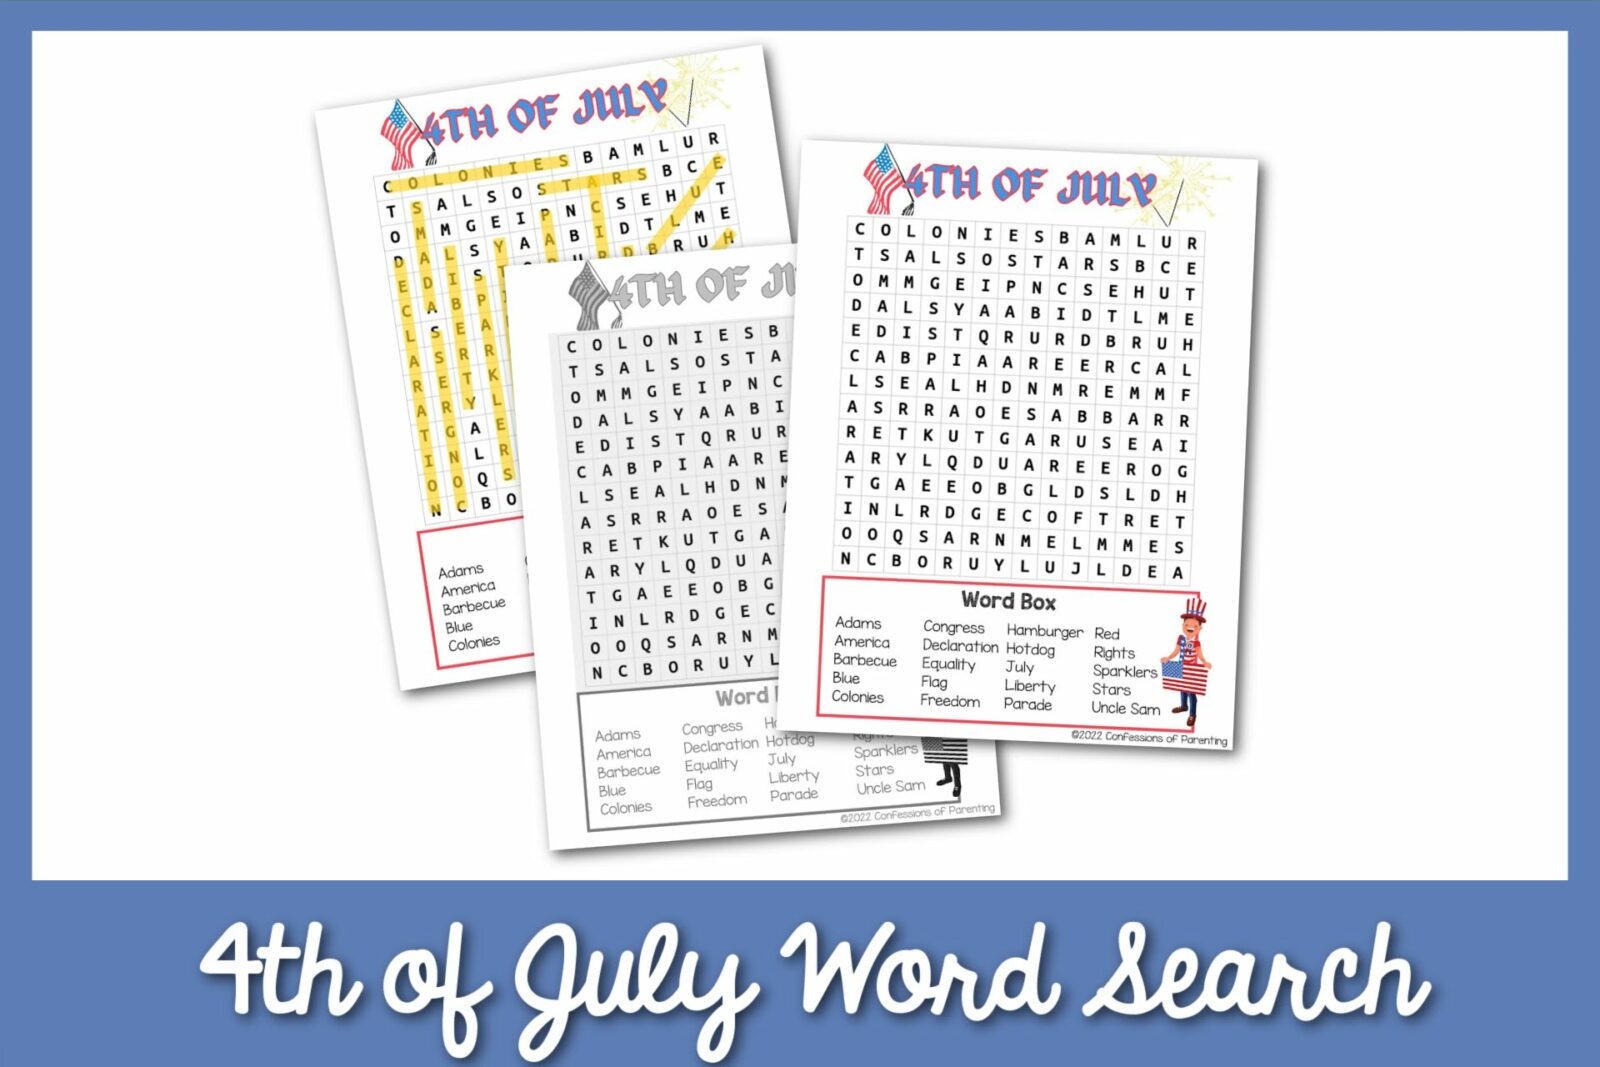 4th of july word search 1